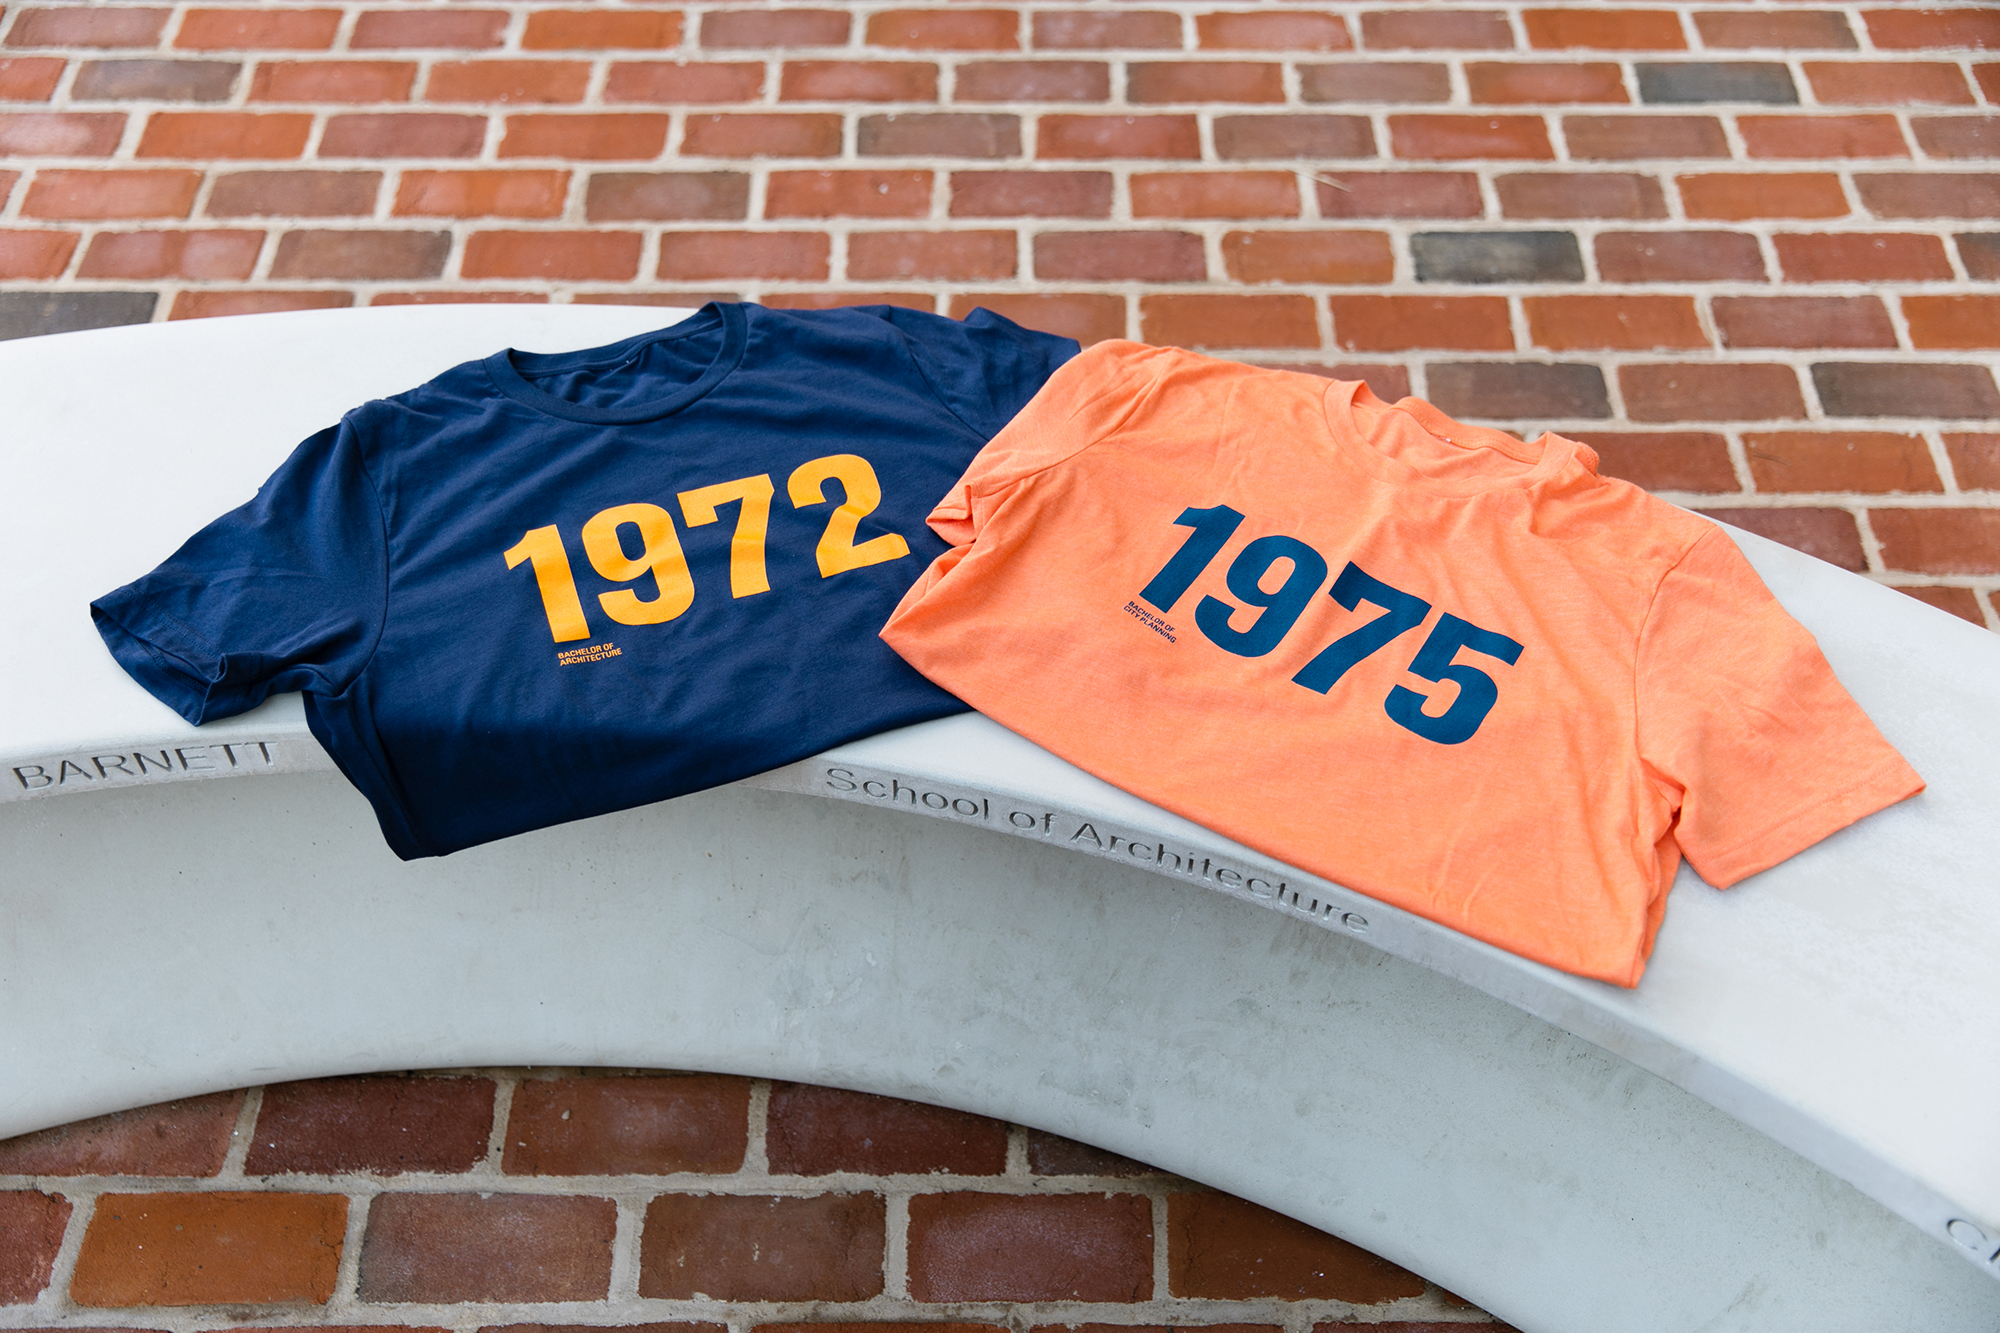 an image of t-shirts with the years 1972 and 1975